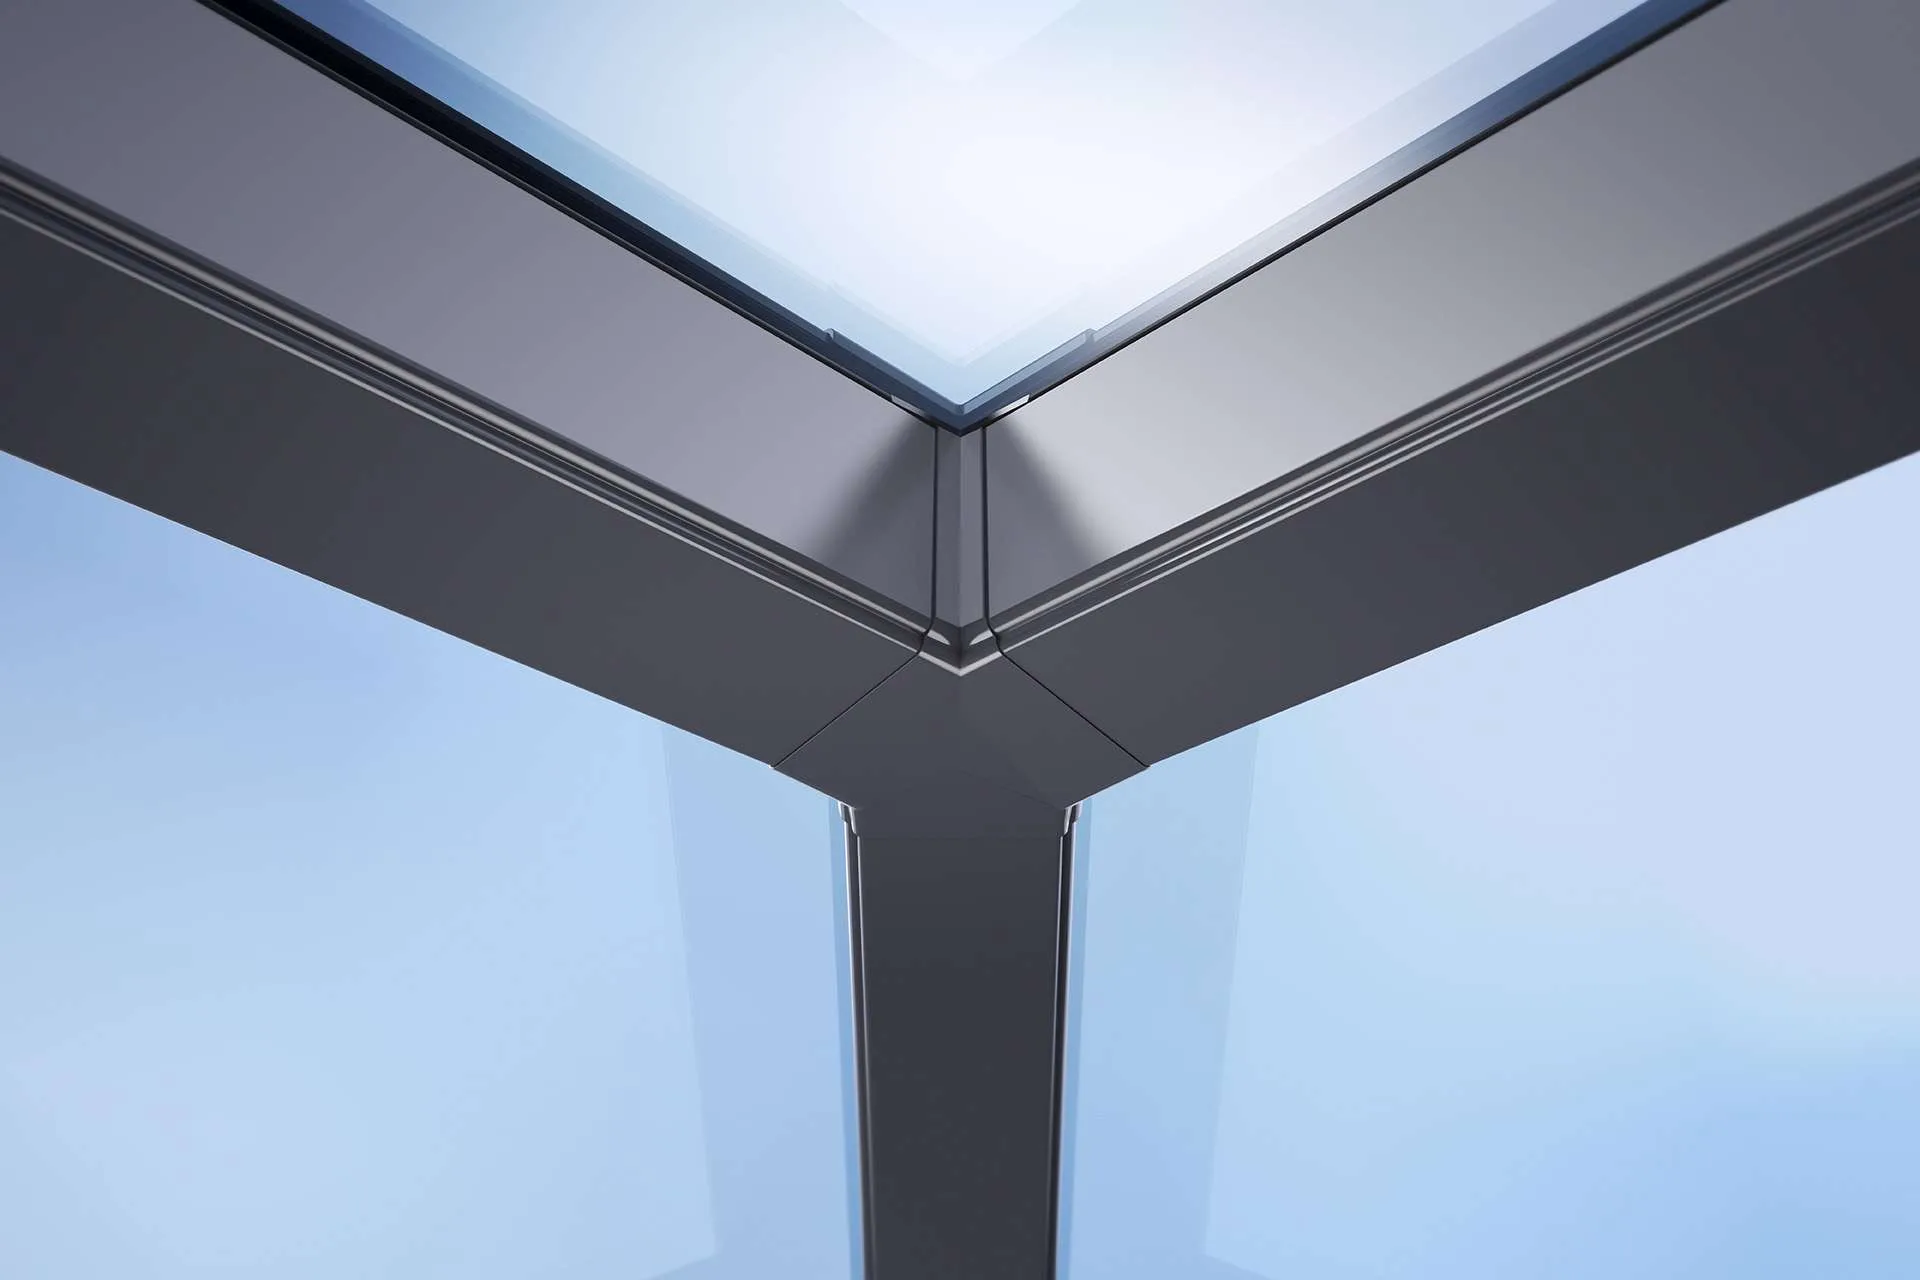 Korniche Roof Lantern's underside, showcasing its seamless joints and concealed fixings. This innovative design creates a clean, minimalist aesthetic that enhances the overall look and feel of your living space.